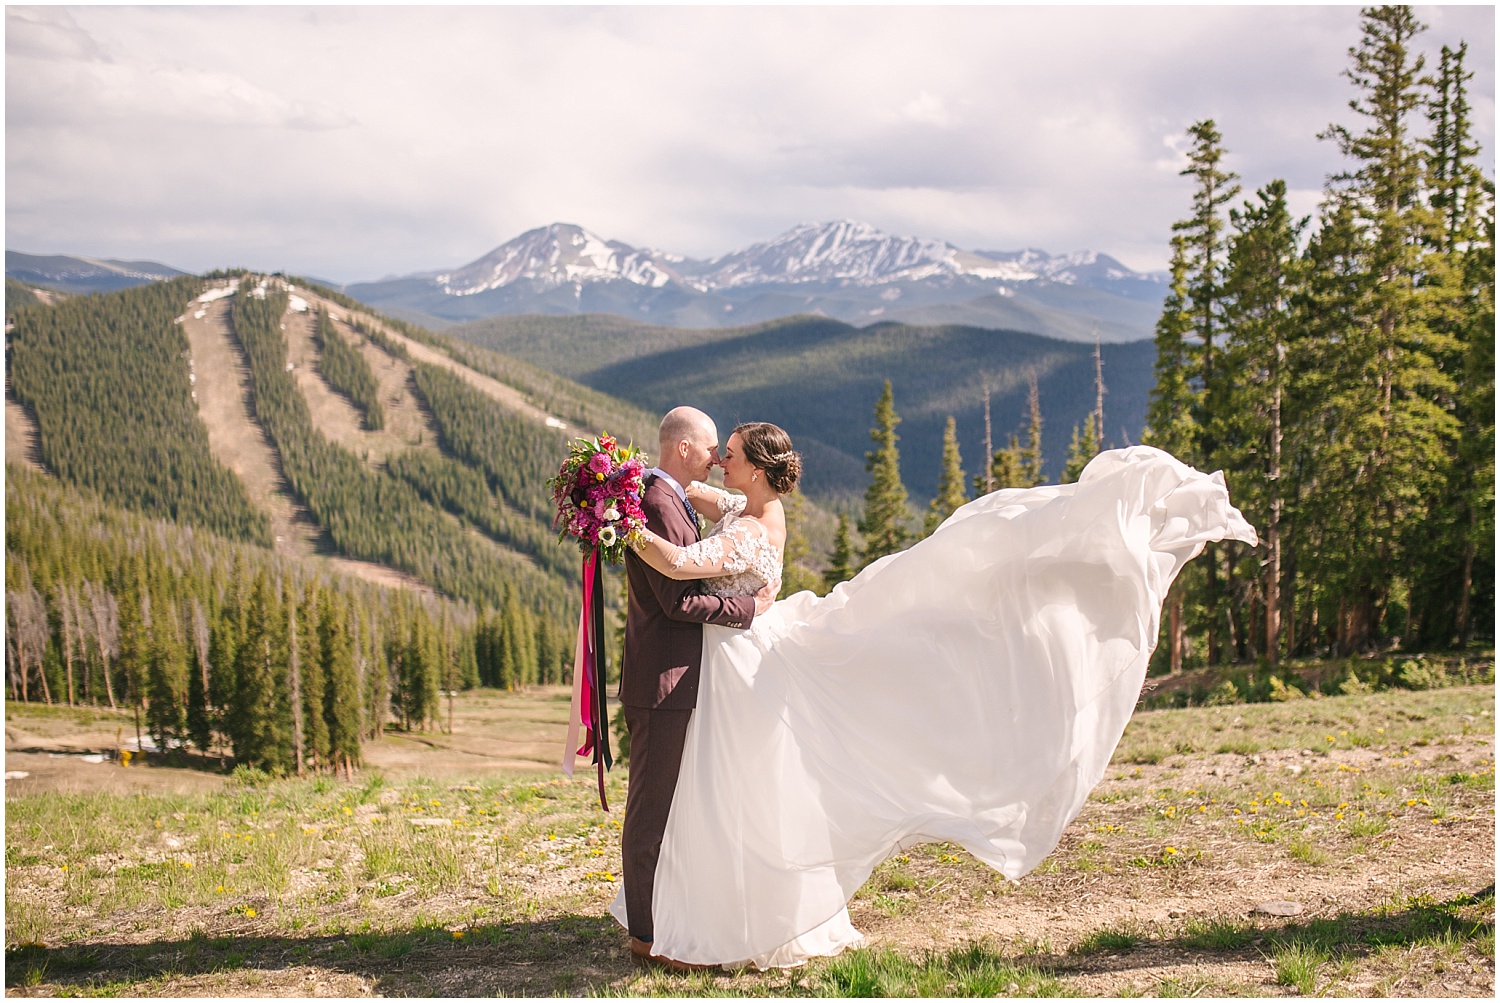 Bride's dress blows in the wind at summit of Keystone Colorado for Ski Tip Lodge wedding